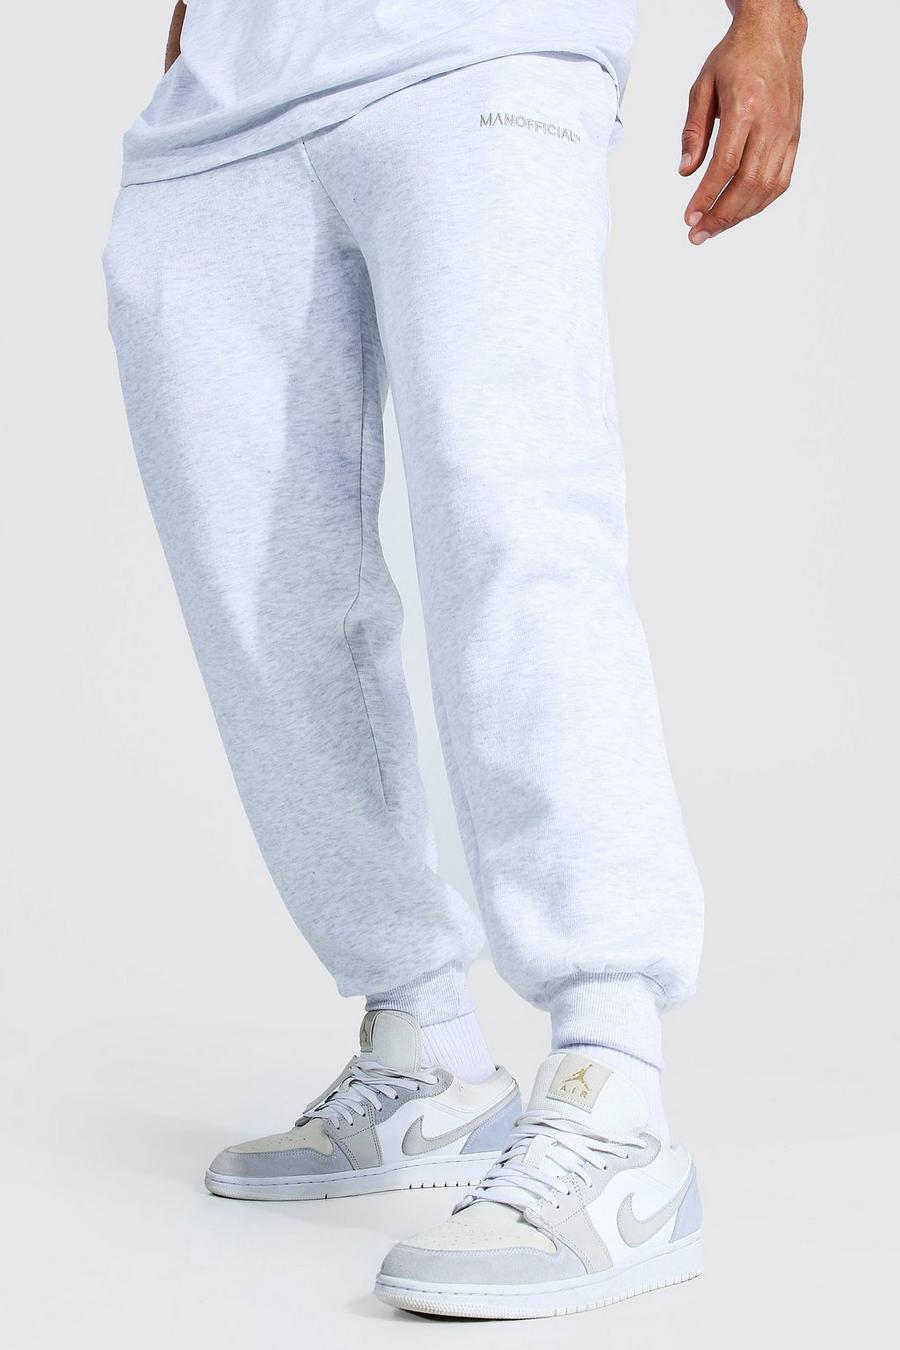 Ash grey Loose Man Official Joggers image number 1